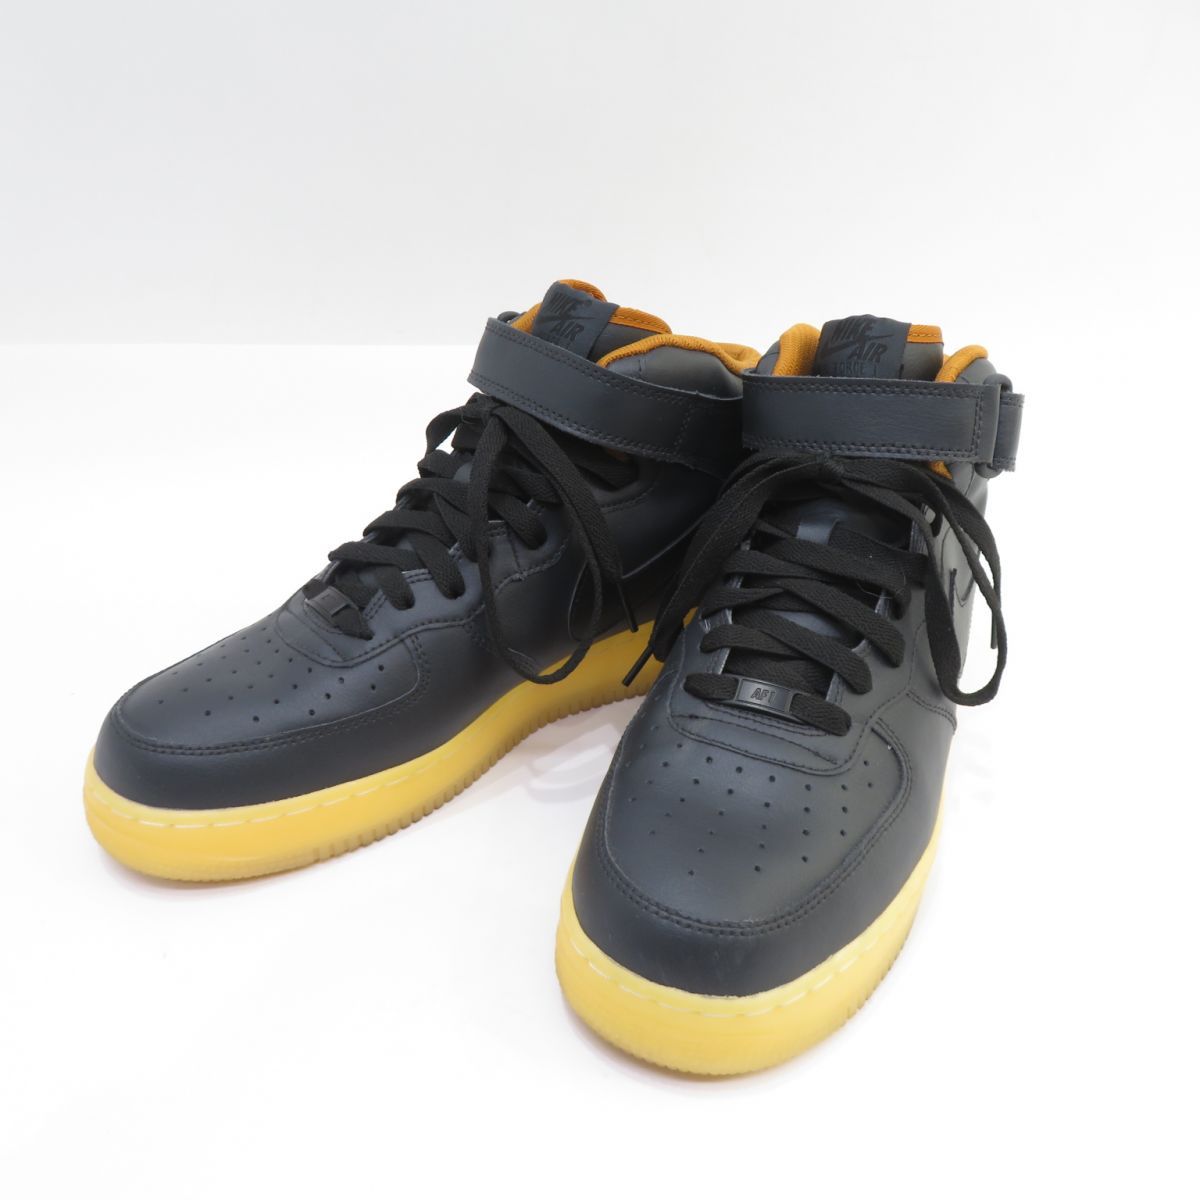 NIKE ナイキ BY YOU AIR FORCE 1 MID エアフォースワン AQ3776-992